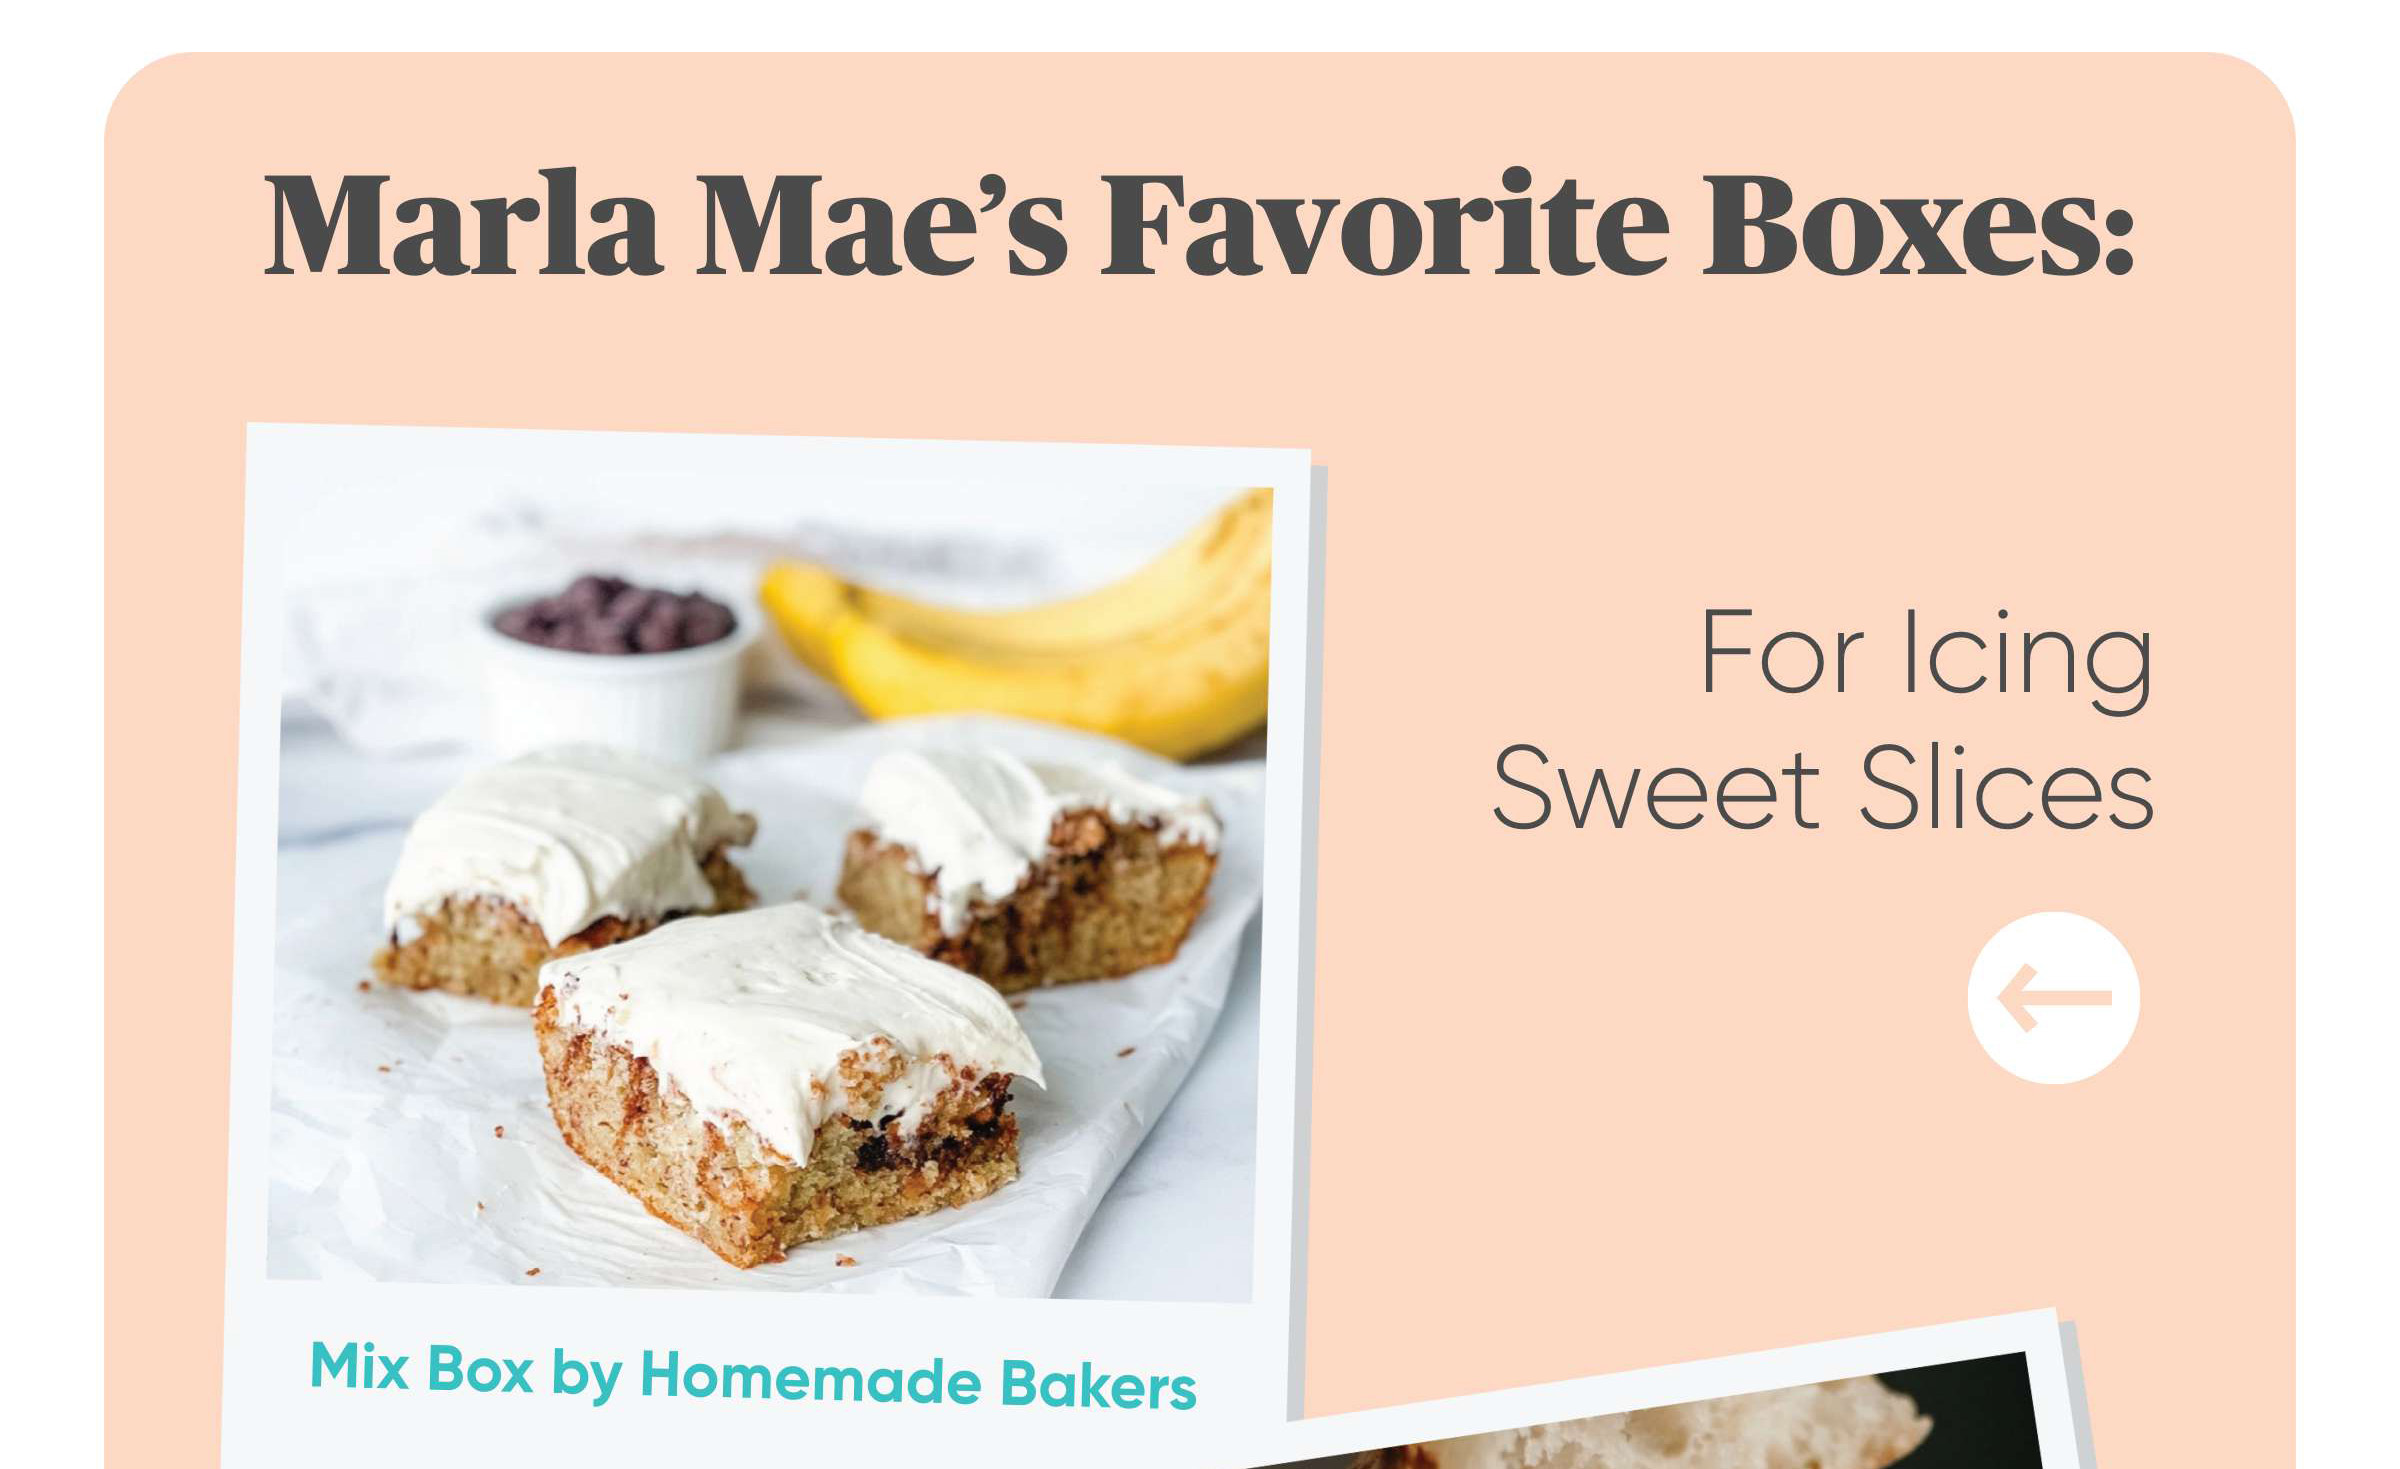 Marla Mae's Favorite Boxes: For Icing Sweet Slices Mix Box by Homemade Bakers